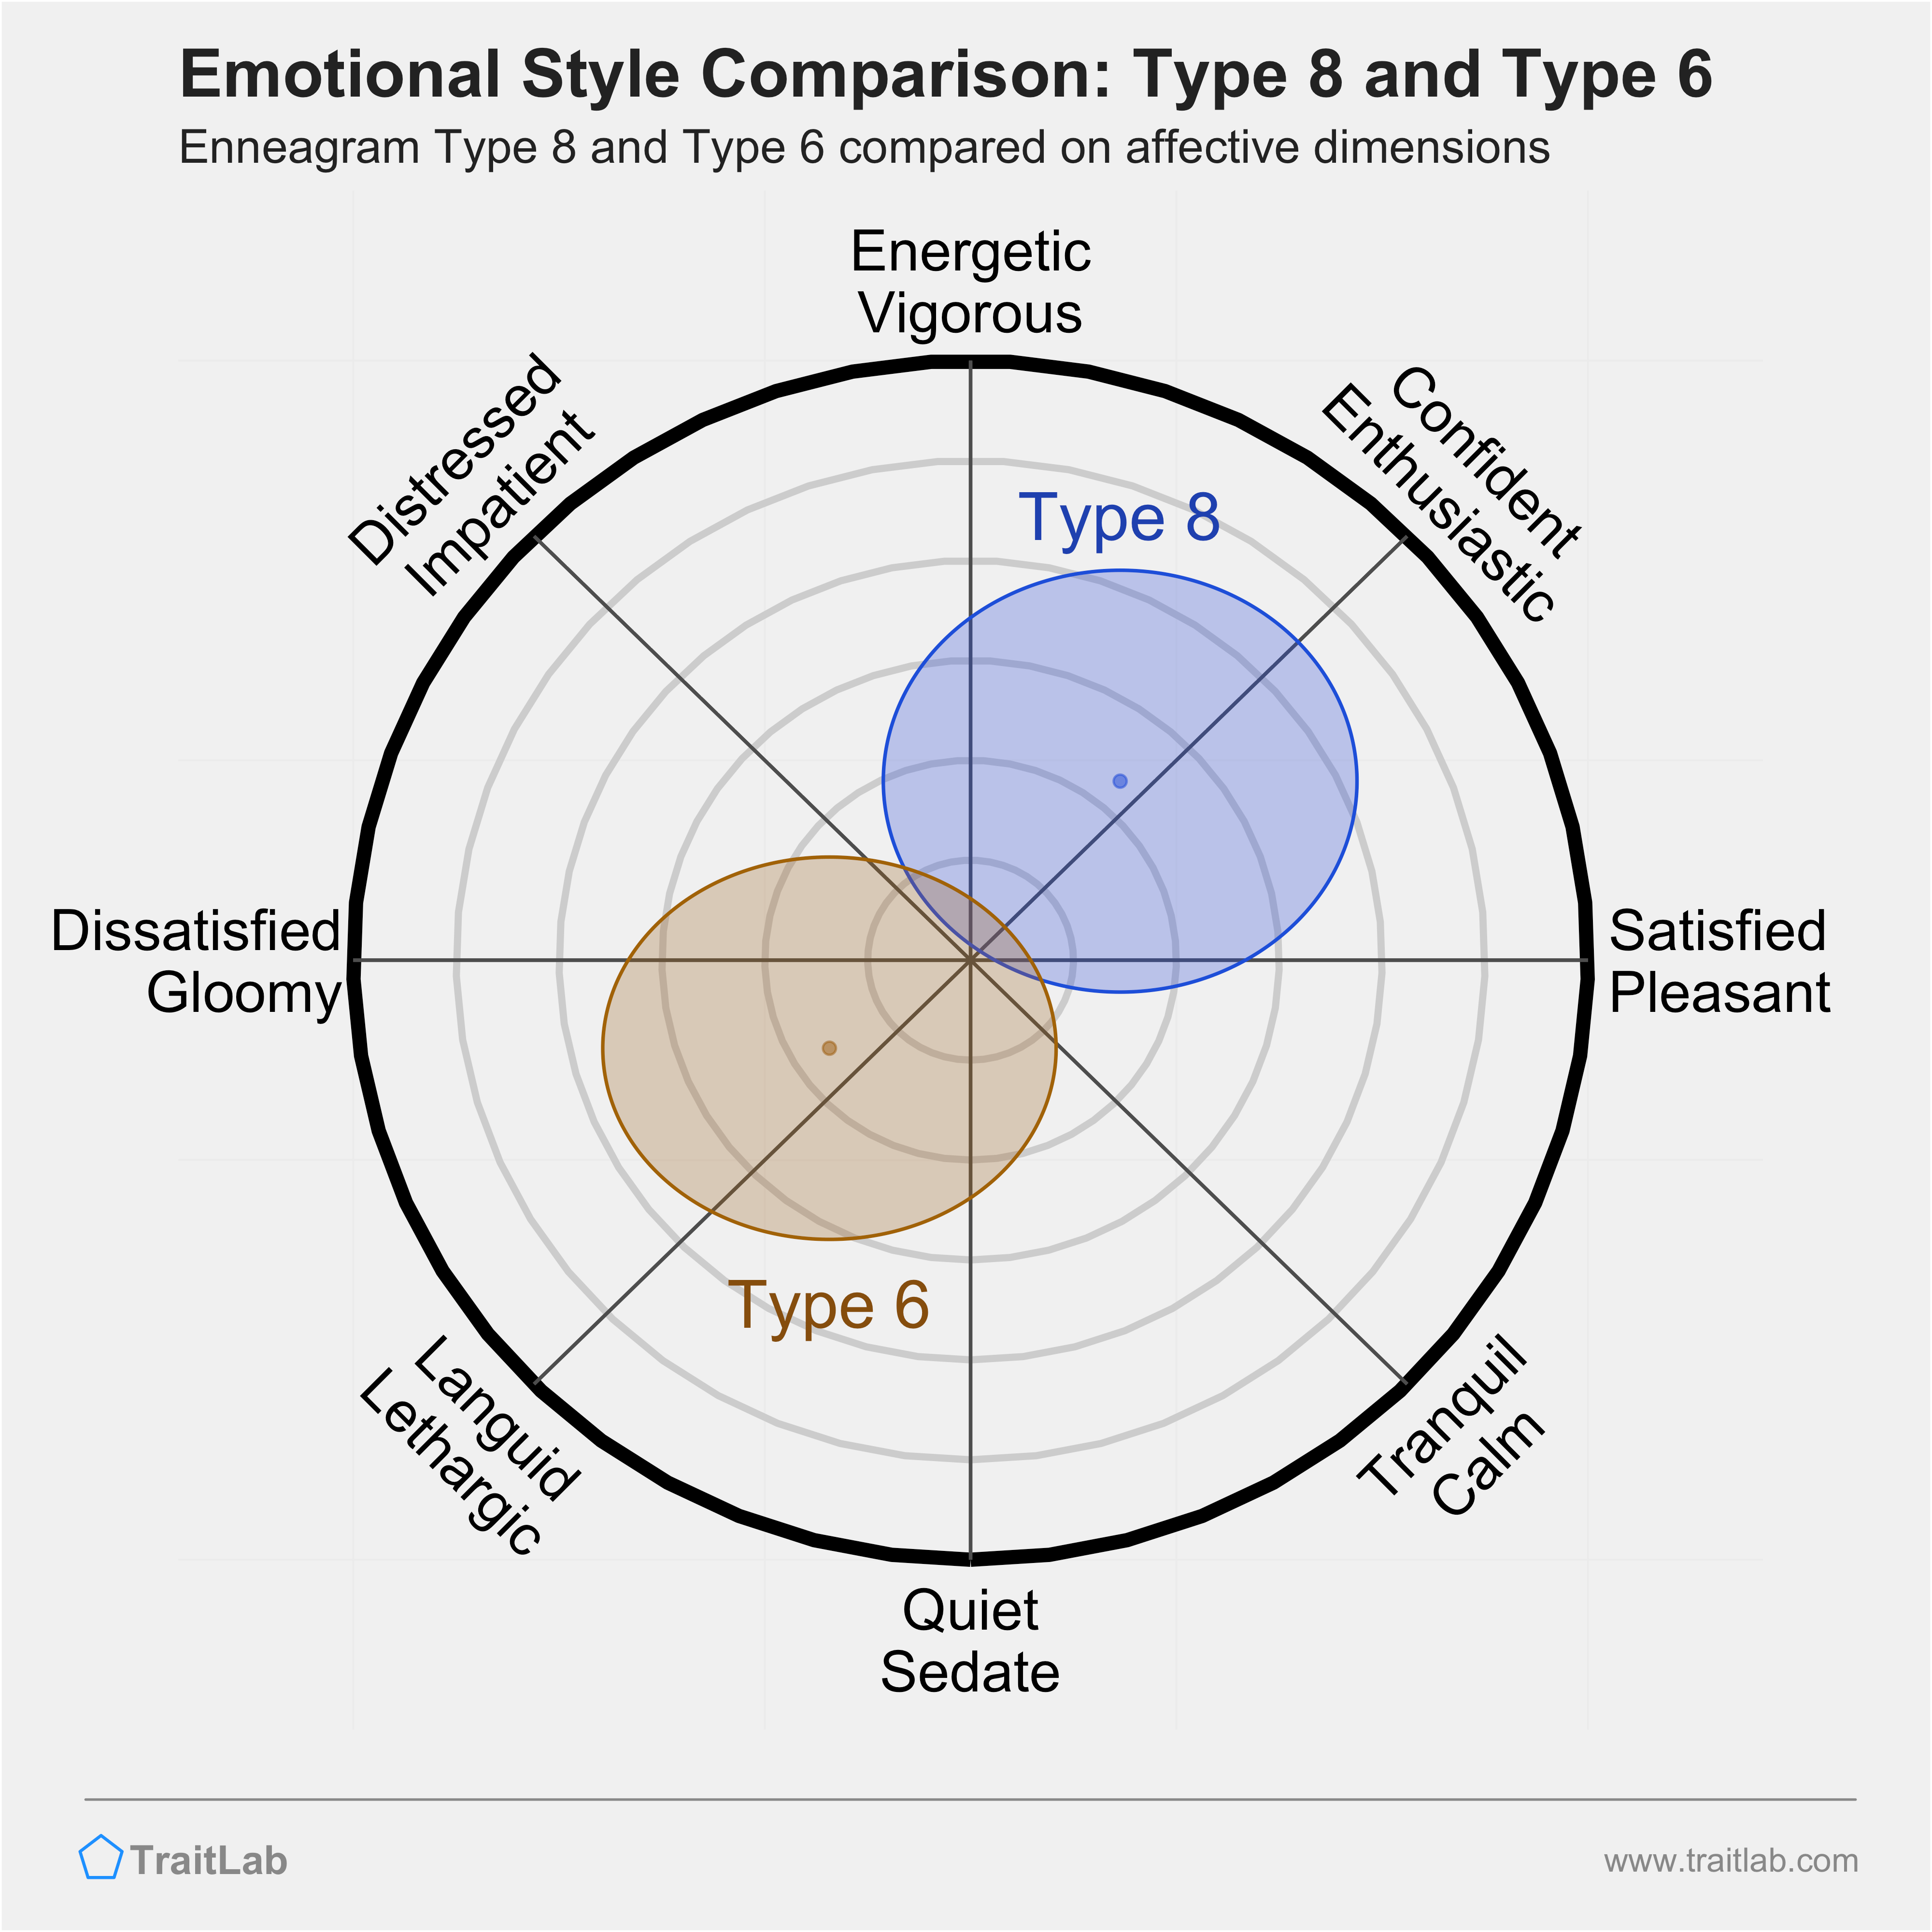 Type 8 and Type 6 comparison across emotional (affective) dimensions